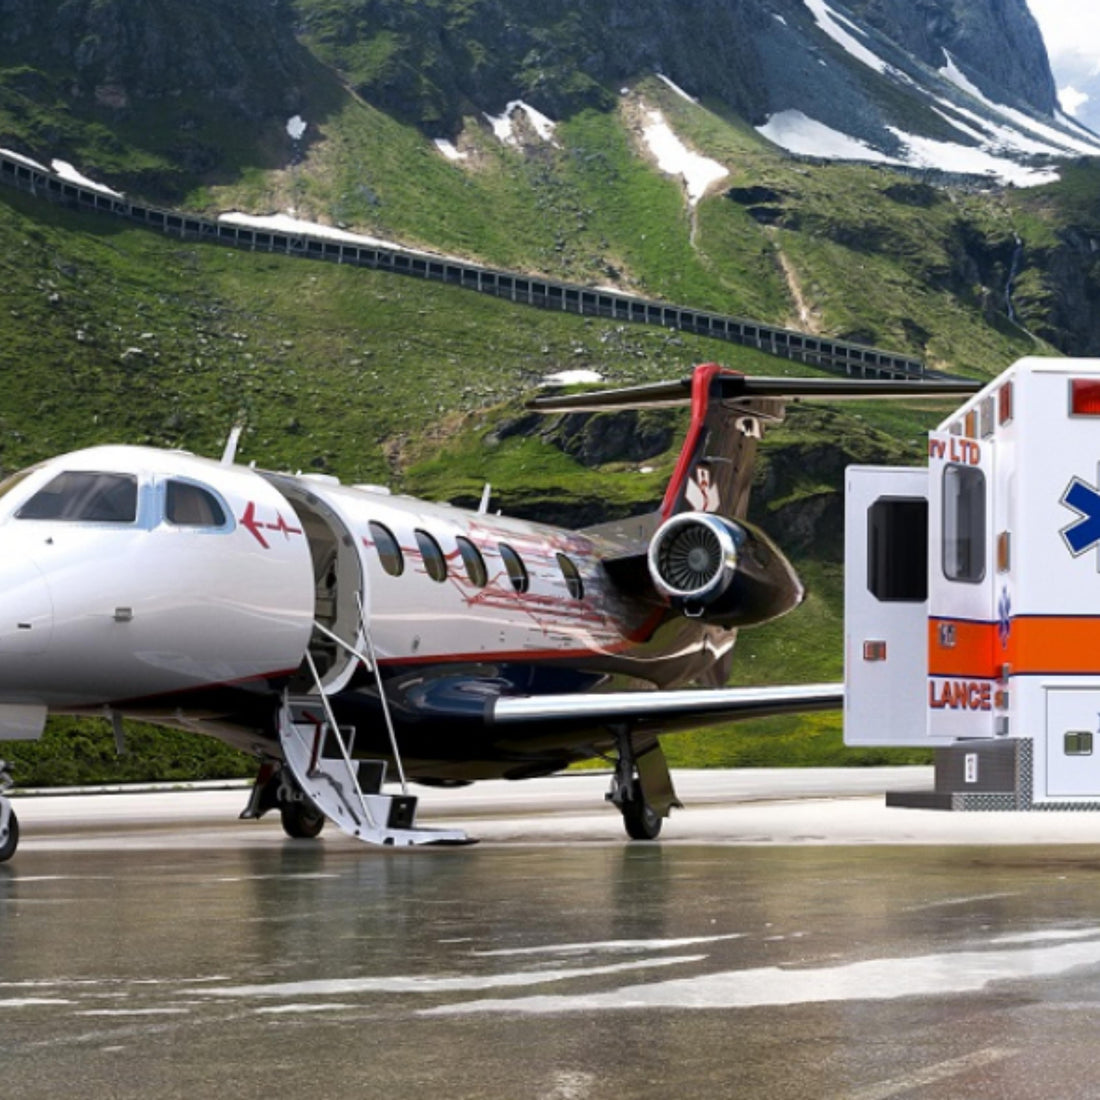 Private Ambulance Jets: A Crucial Innovation in Air Medical Services